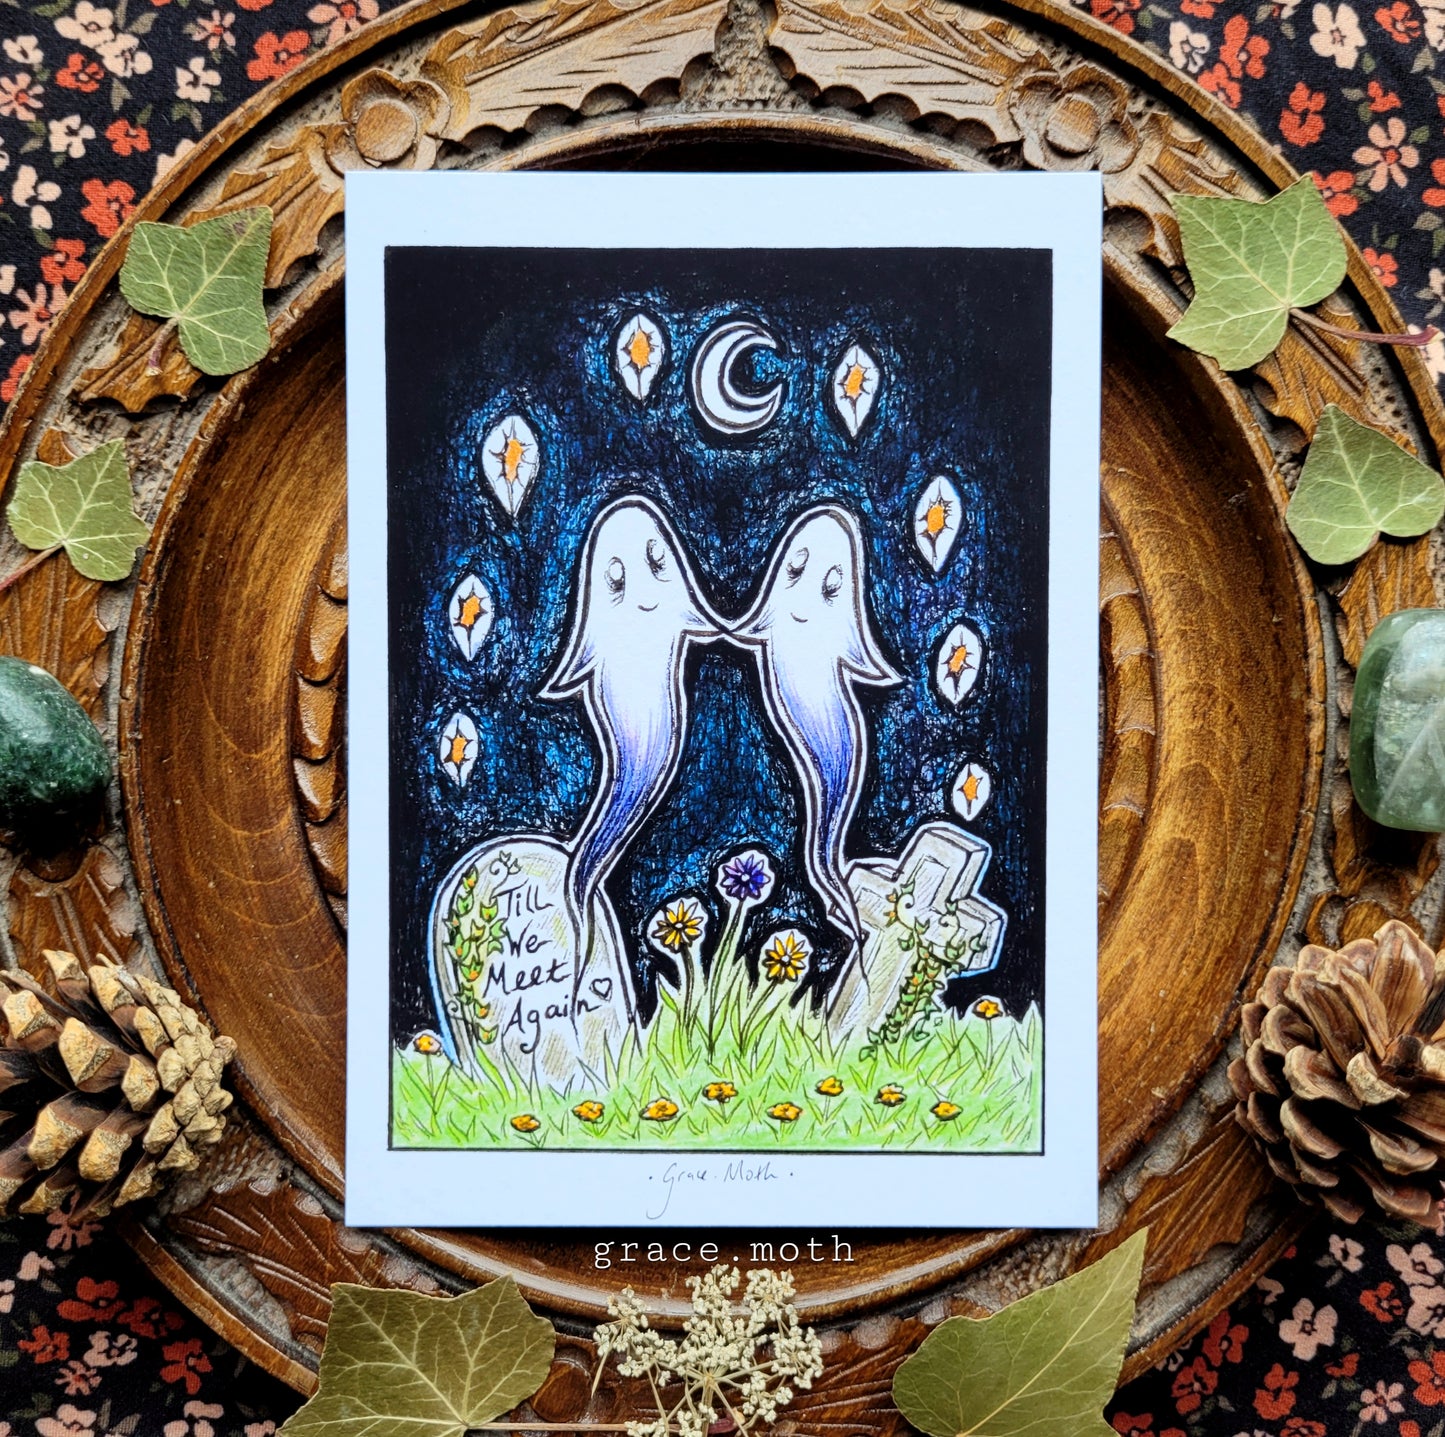 Cemetery Stroll - Ghosties - A6 print by Grace Moth - 5.8 x 4.1 - Cottagecore - Gothic - Witchy